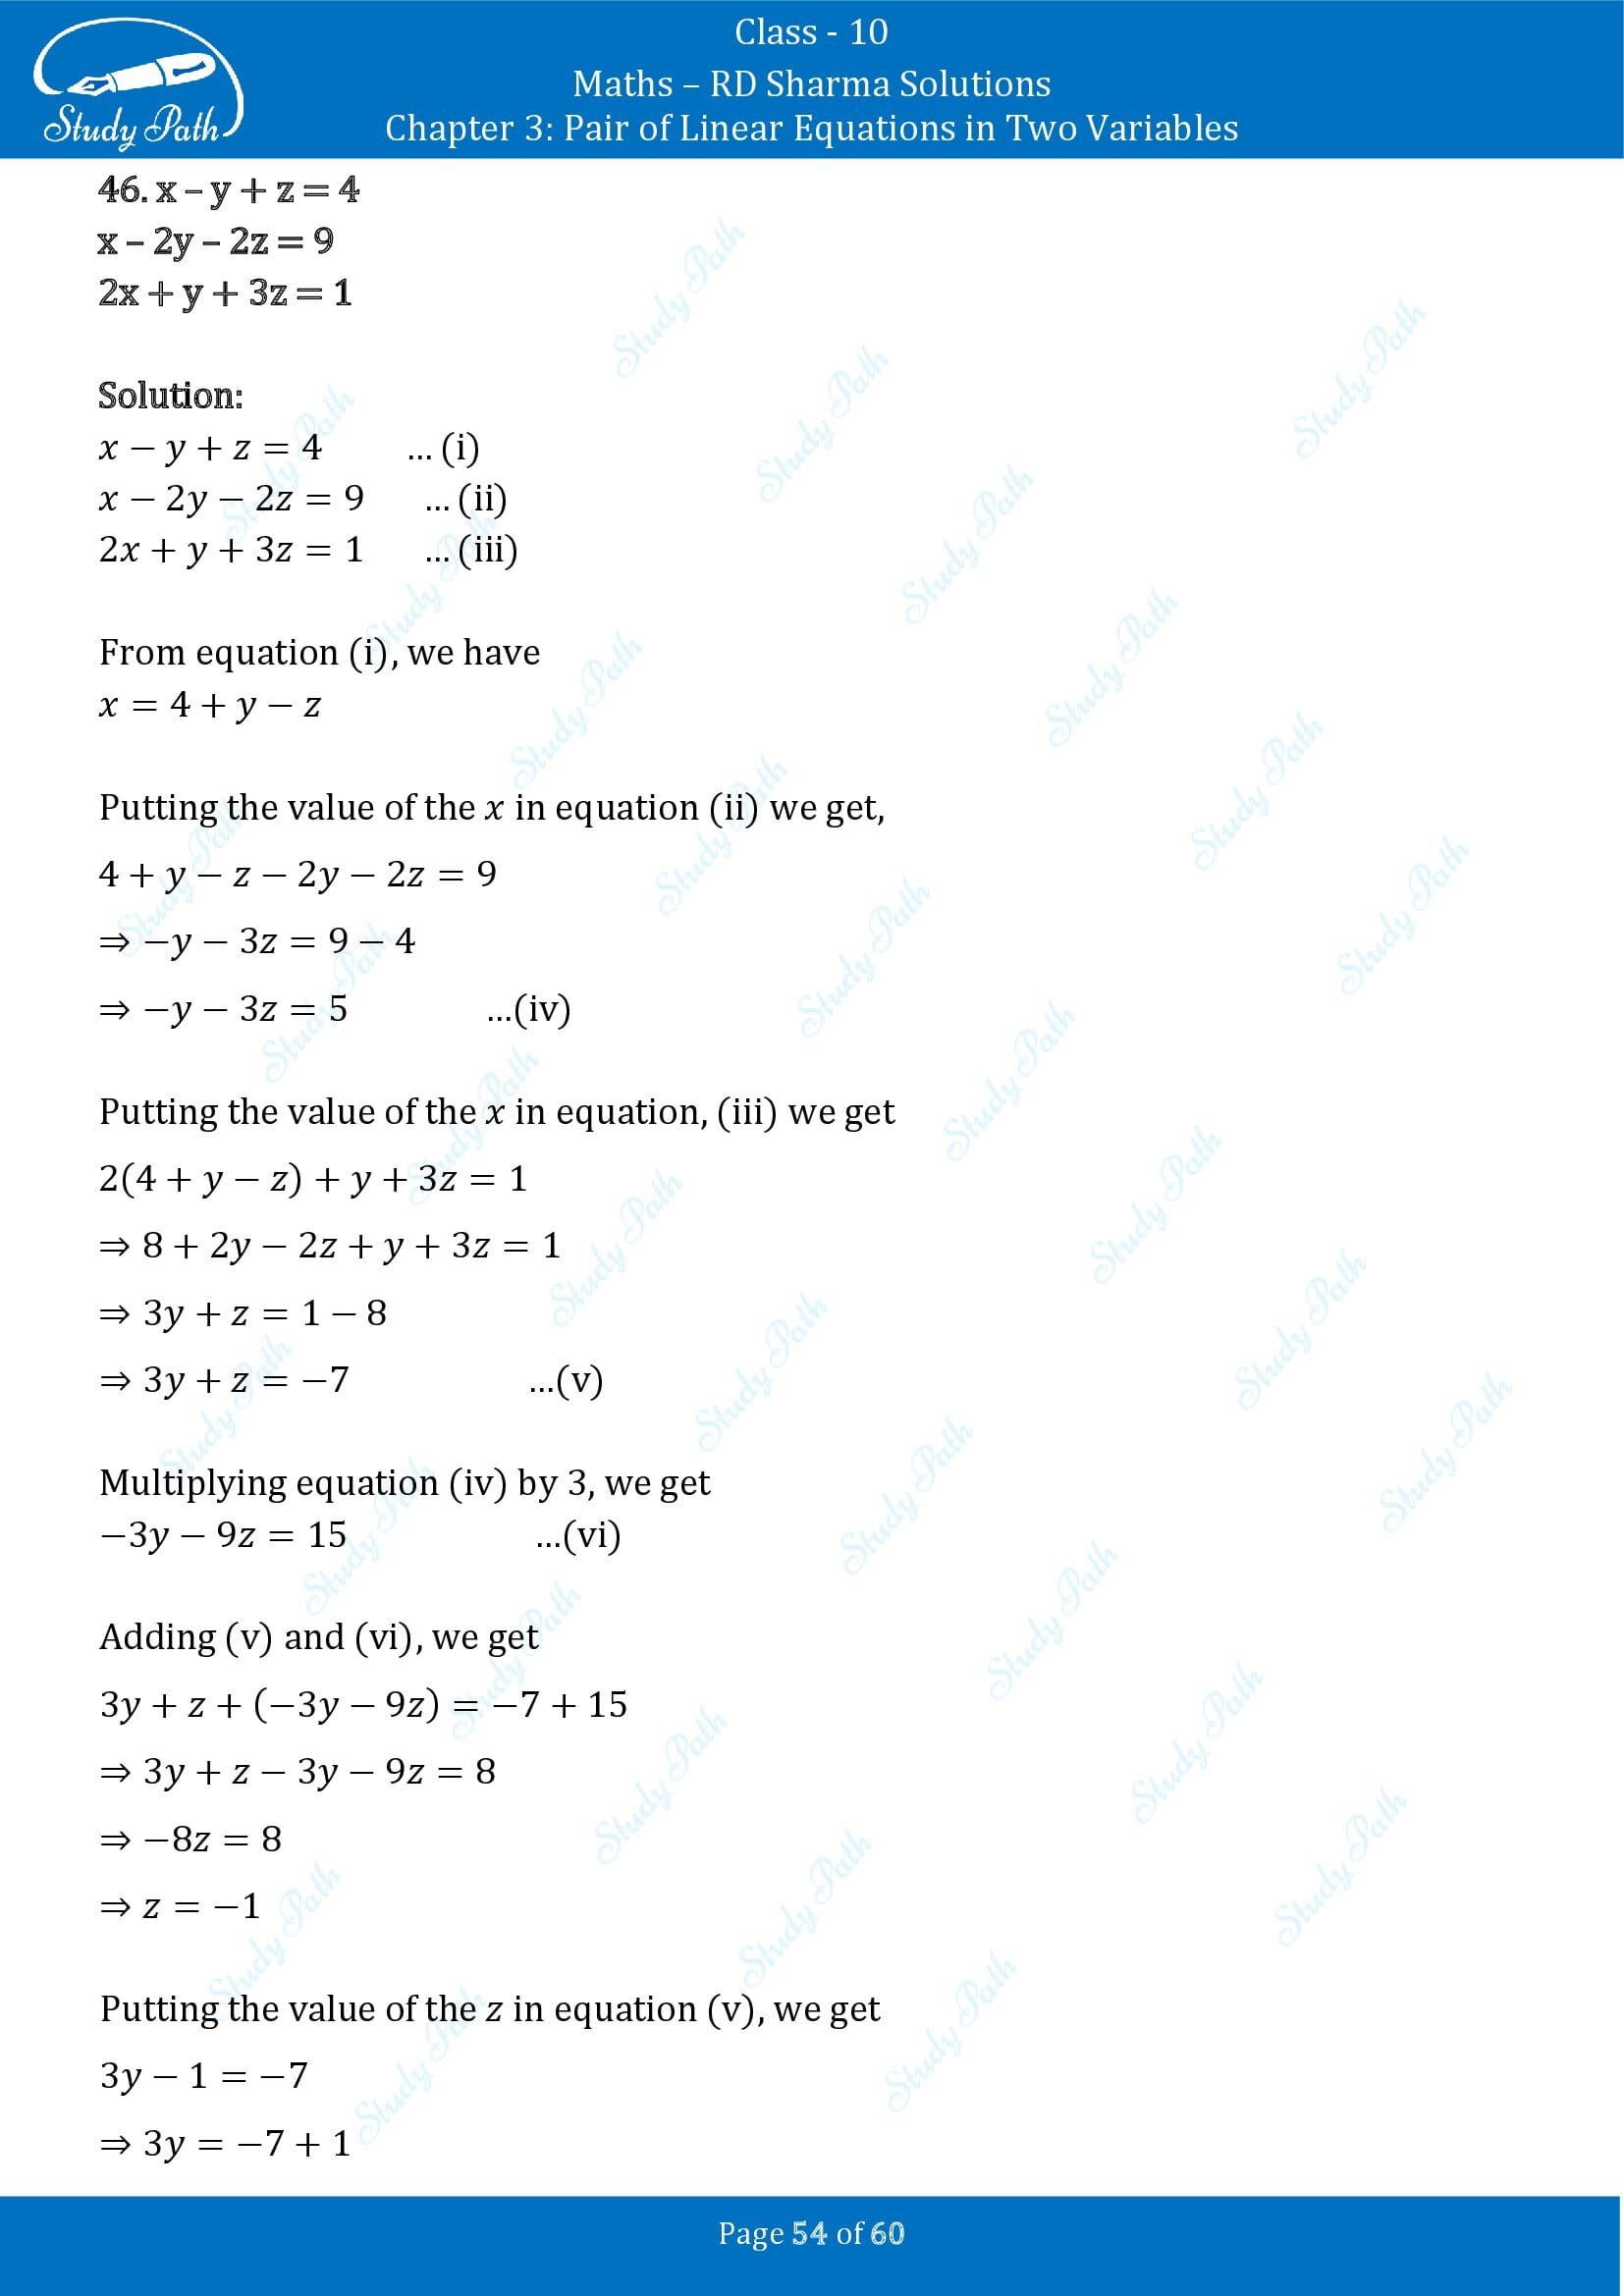 RD Sharma Solutions Class 10 Chapter 3 Pair of Linear Equations in Two Variables Exercise 3.3 00054